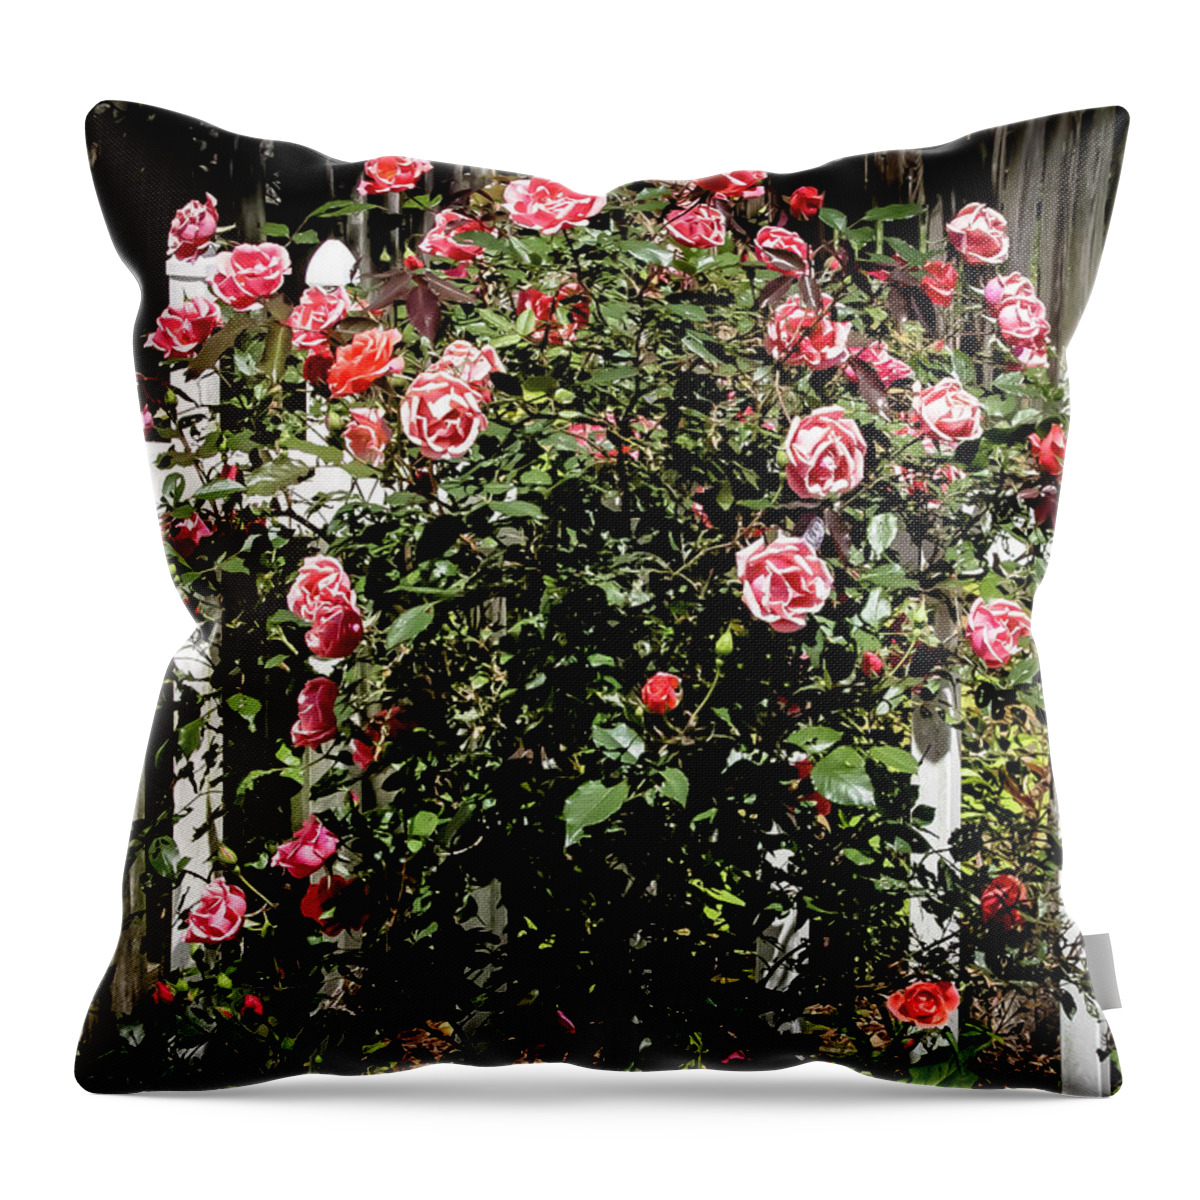 Rose Throw Pillow featuring the digital art Pink Roses by Ed Stines